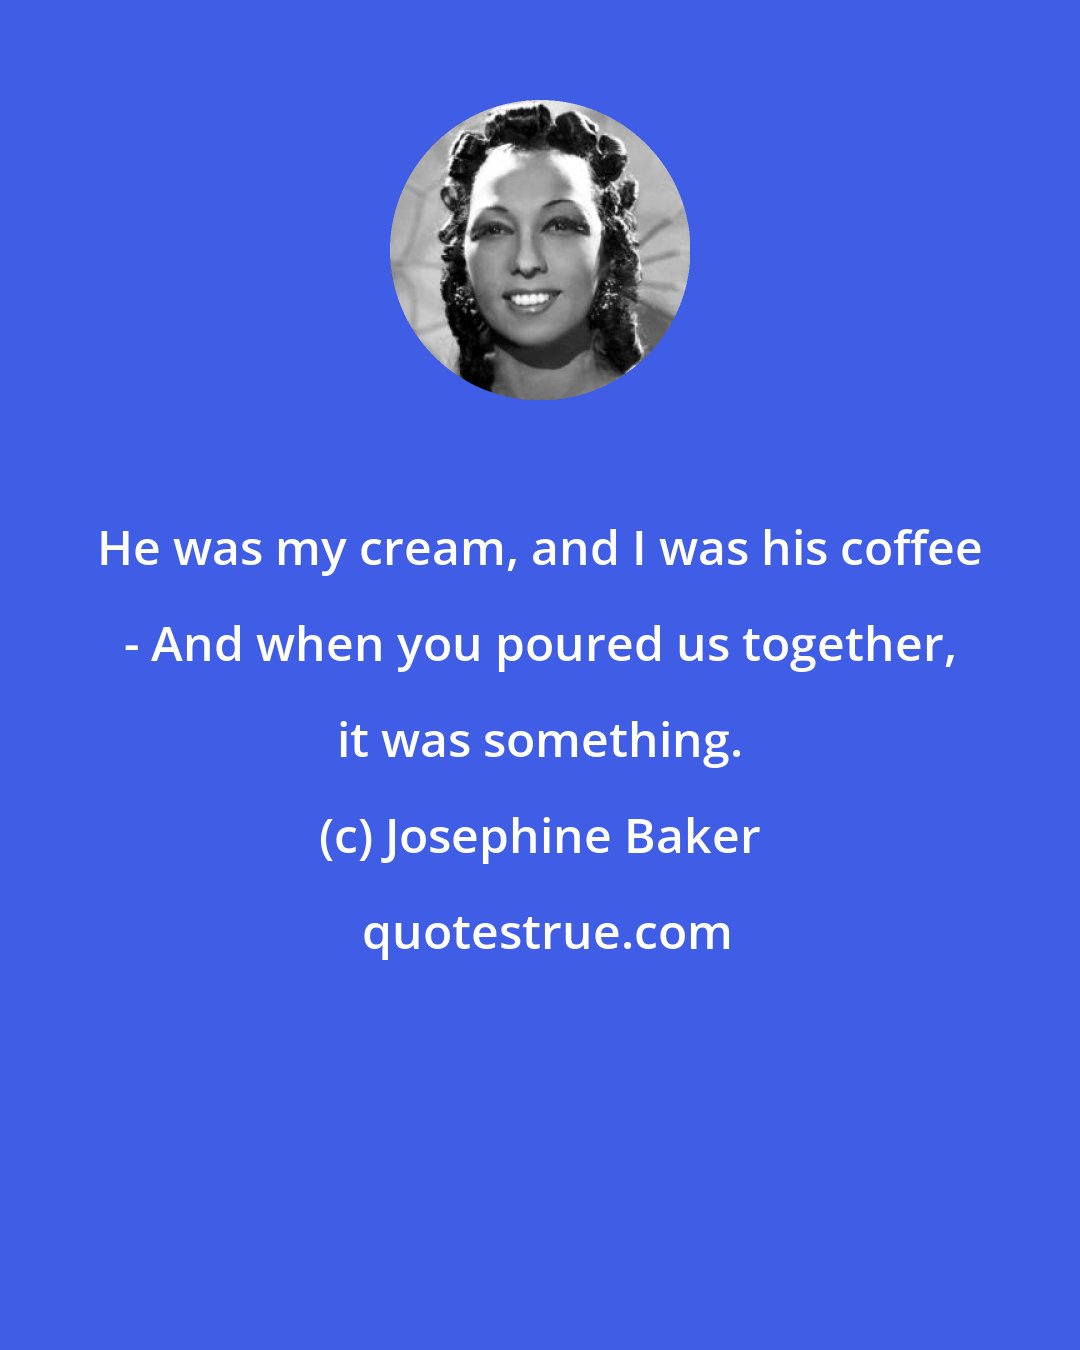 Josephine Baker: He was my cream, and I was his coffee - And when you poured us together, it was something.